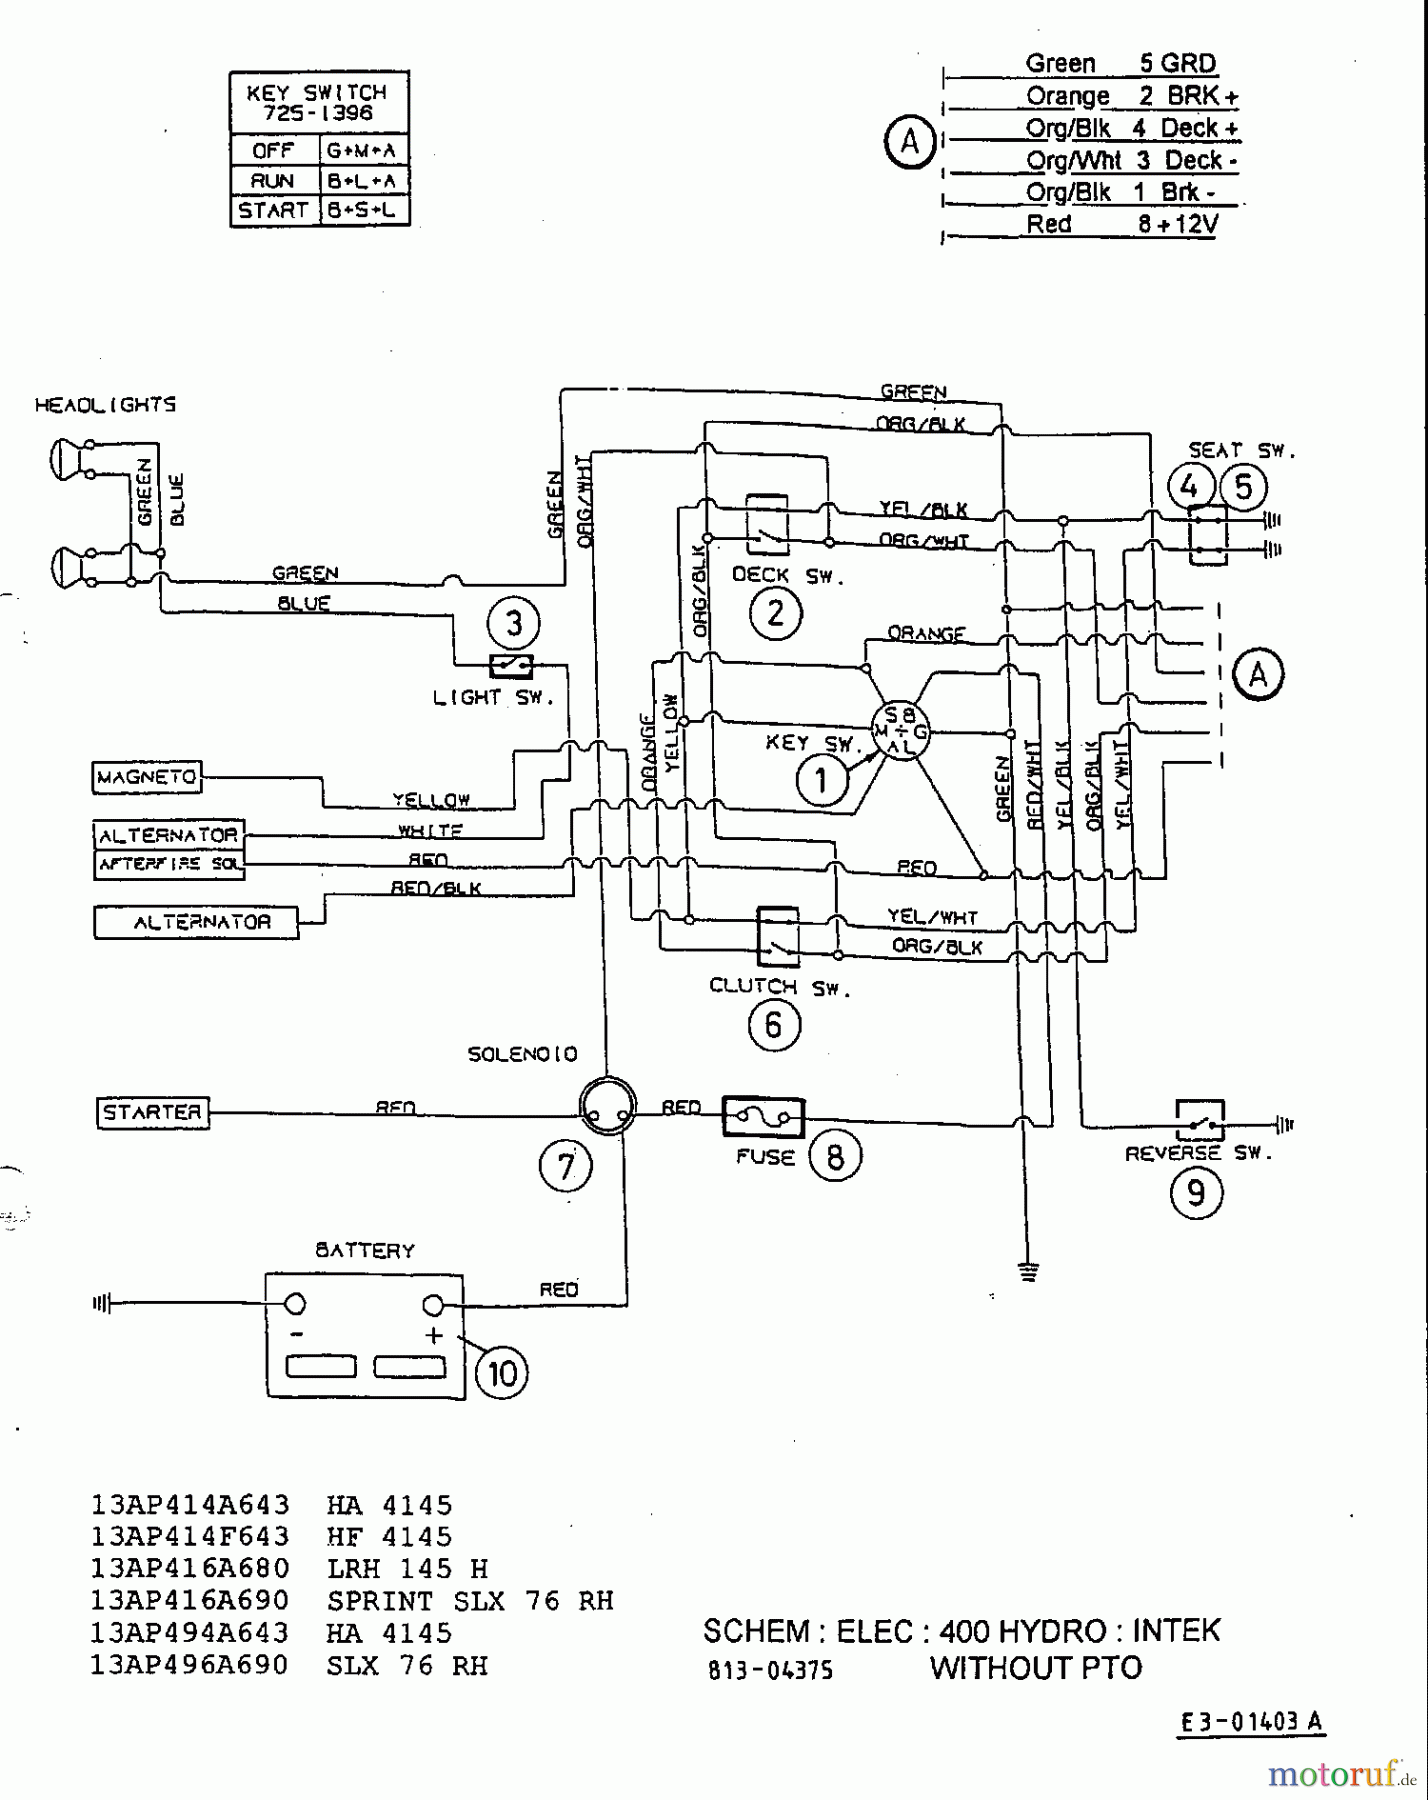  Yard-Man Lawn tractors HA 4135 13AA414A643  (2002) Wiring diagram Intek without electric clutch